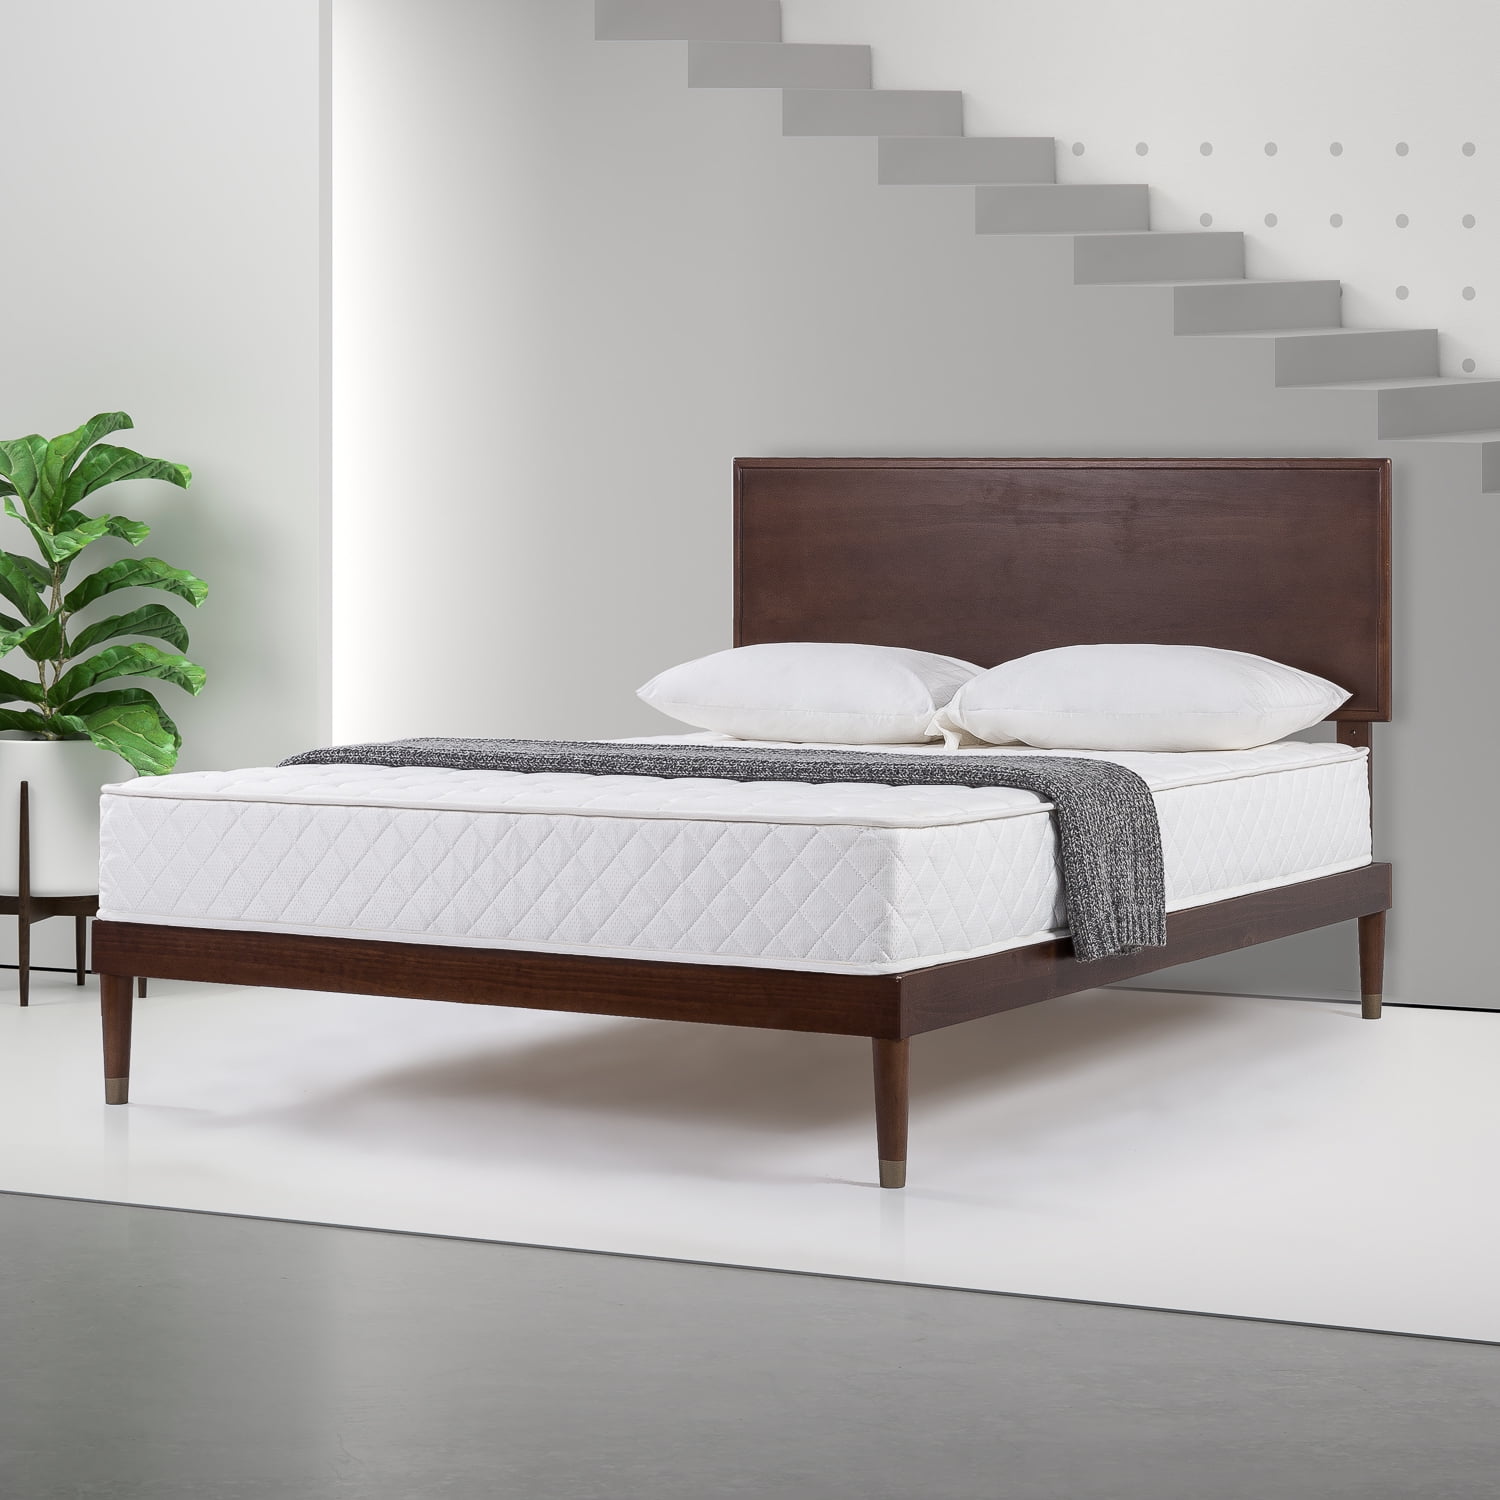 Slumber 1 By Zinus Quilted Top 8, King Bed Without Box Spring